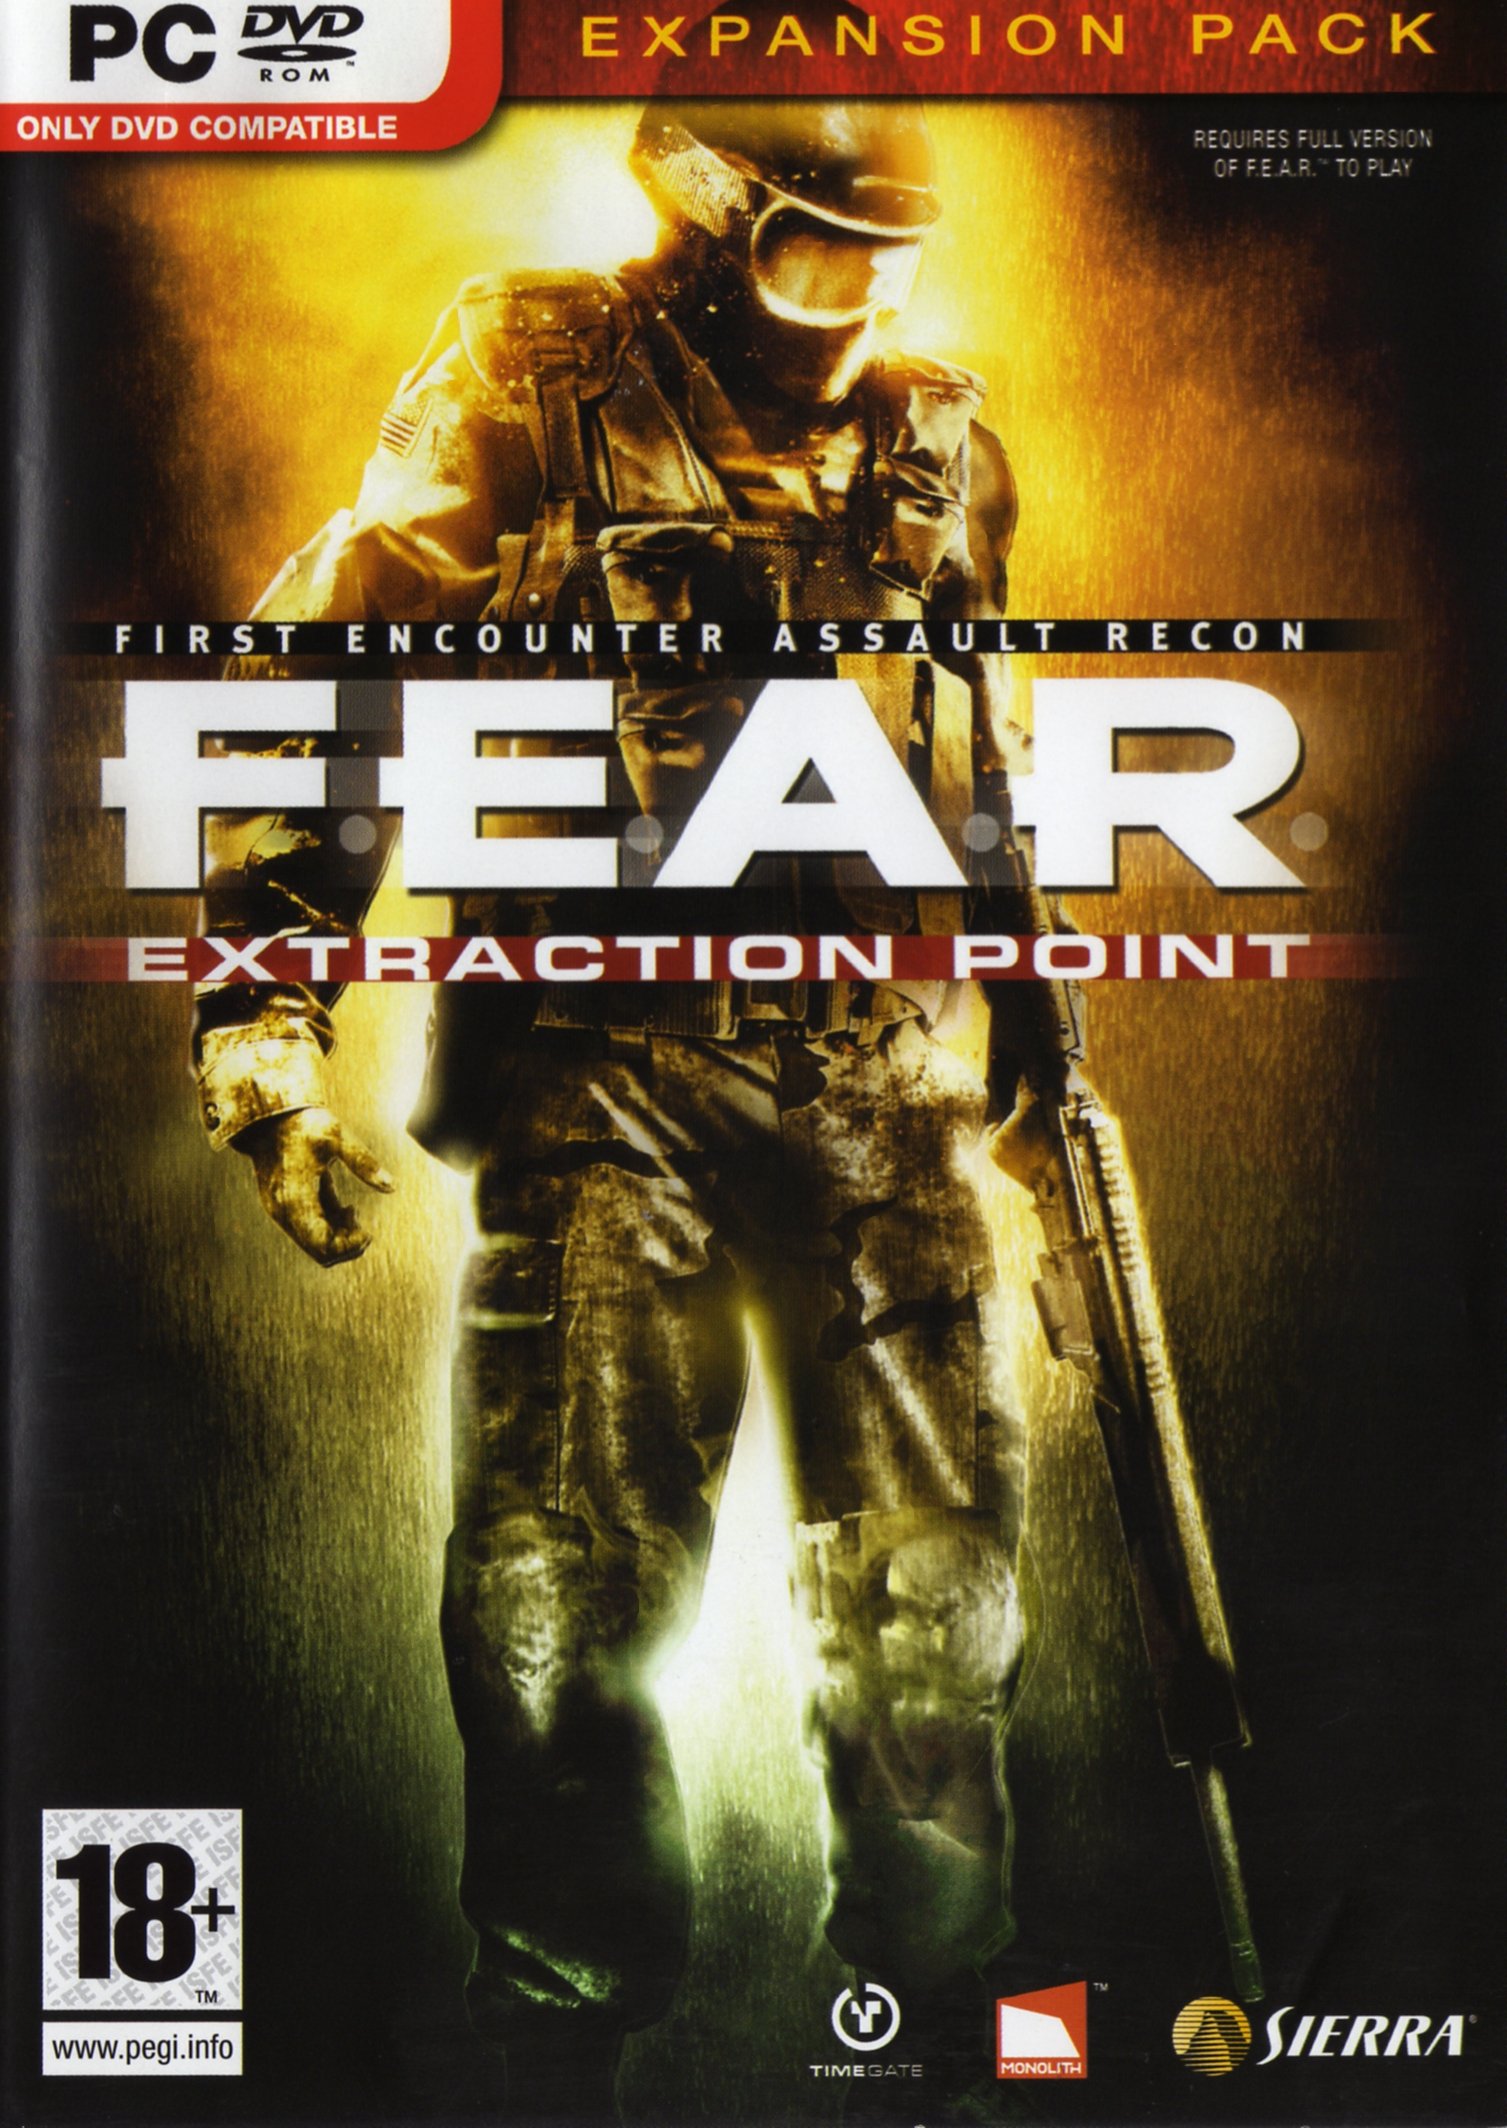 Fear extraction. Fear Extraction point обложка. F.E.A.R. Perseus mandate обложка PC. F.E.A.R. 2005 обложка.